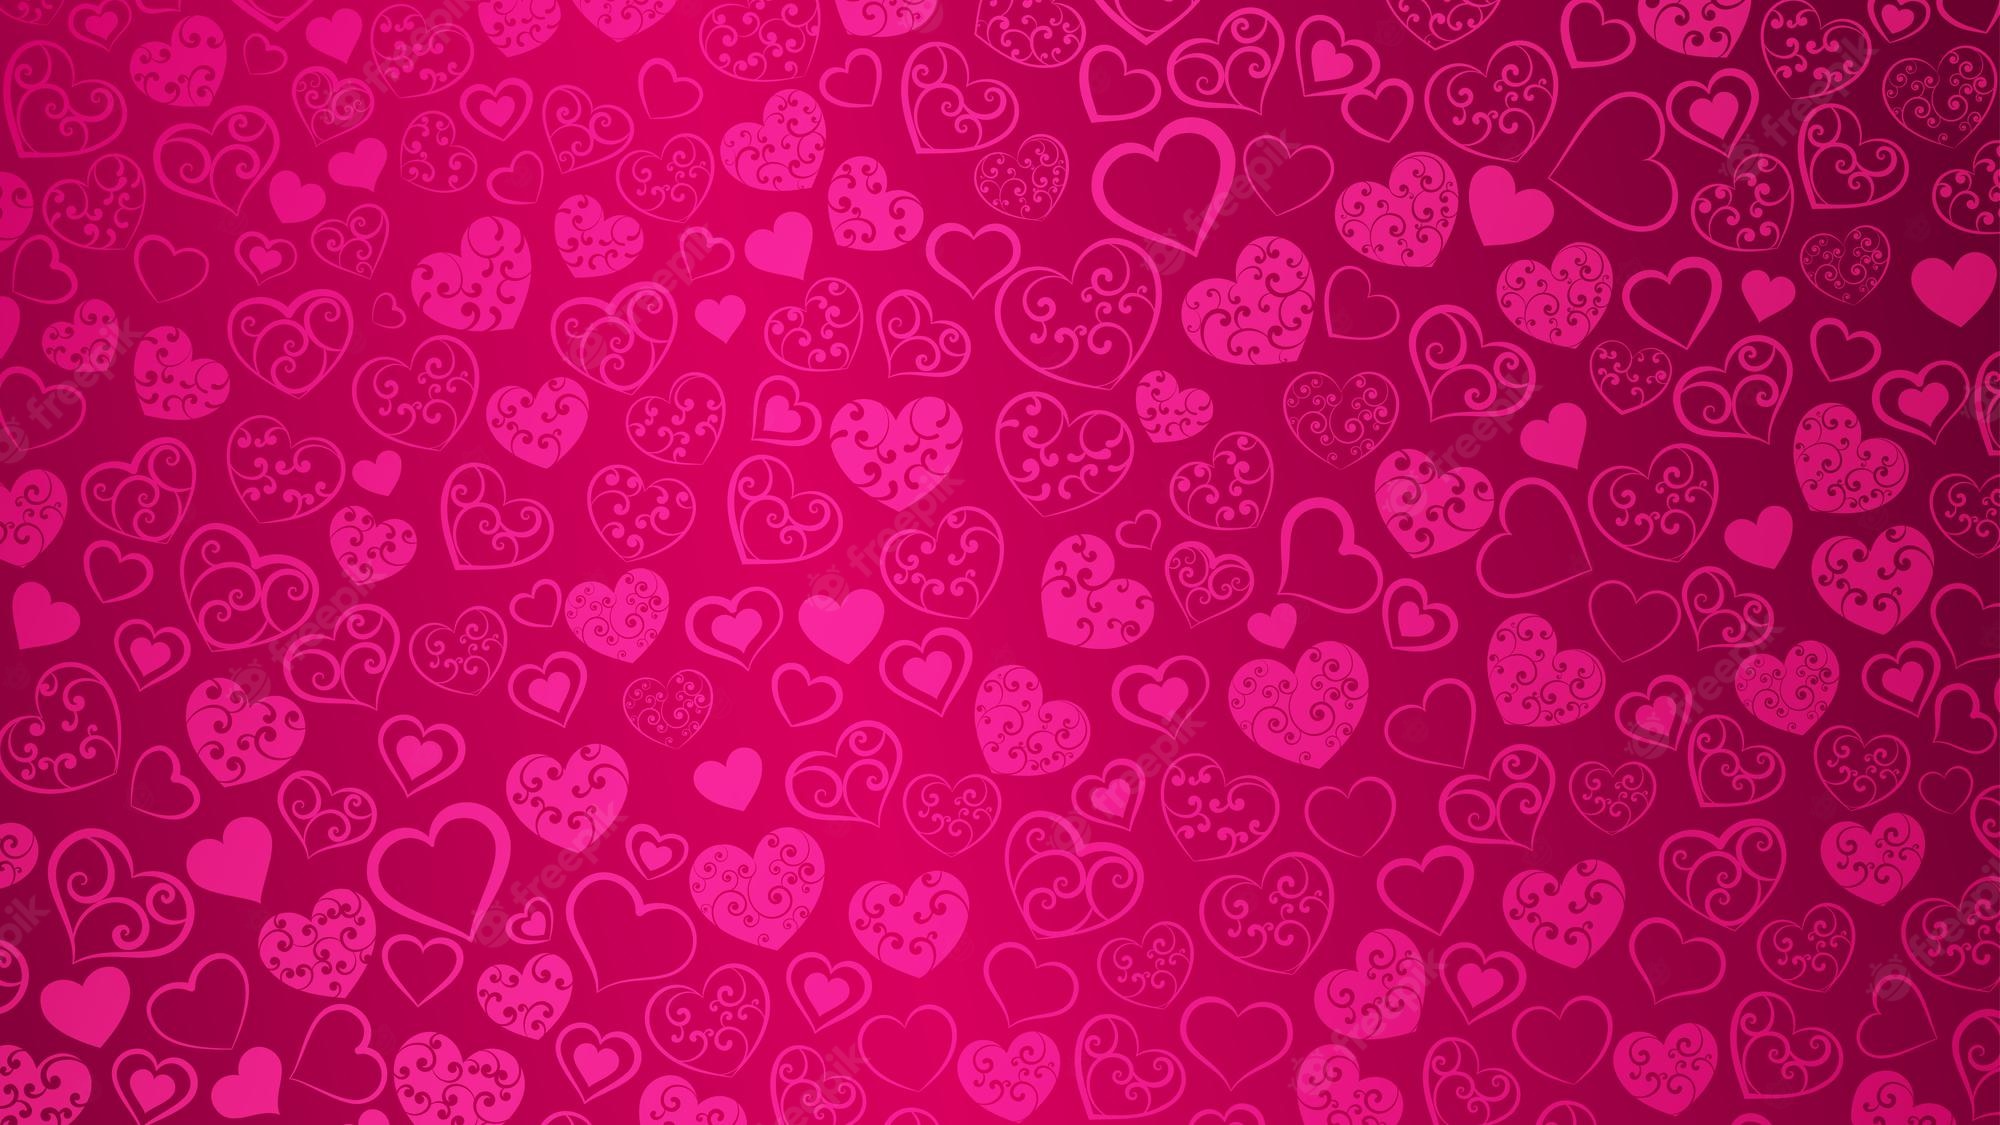 Premium Vector. Background of big and small hearts with swirls in pink colors